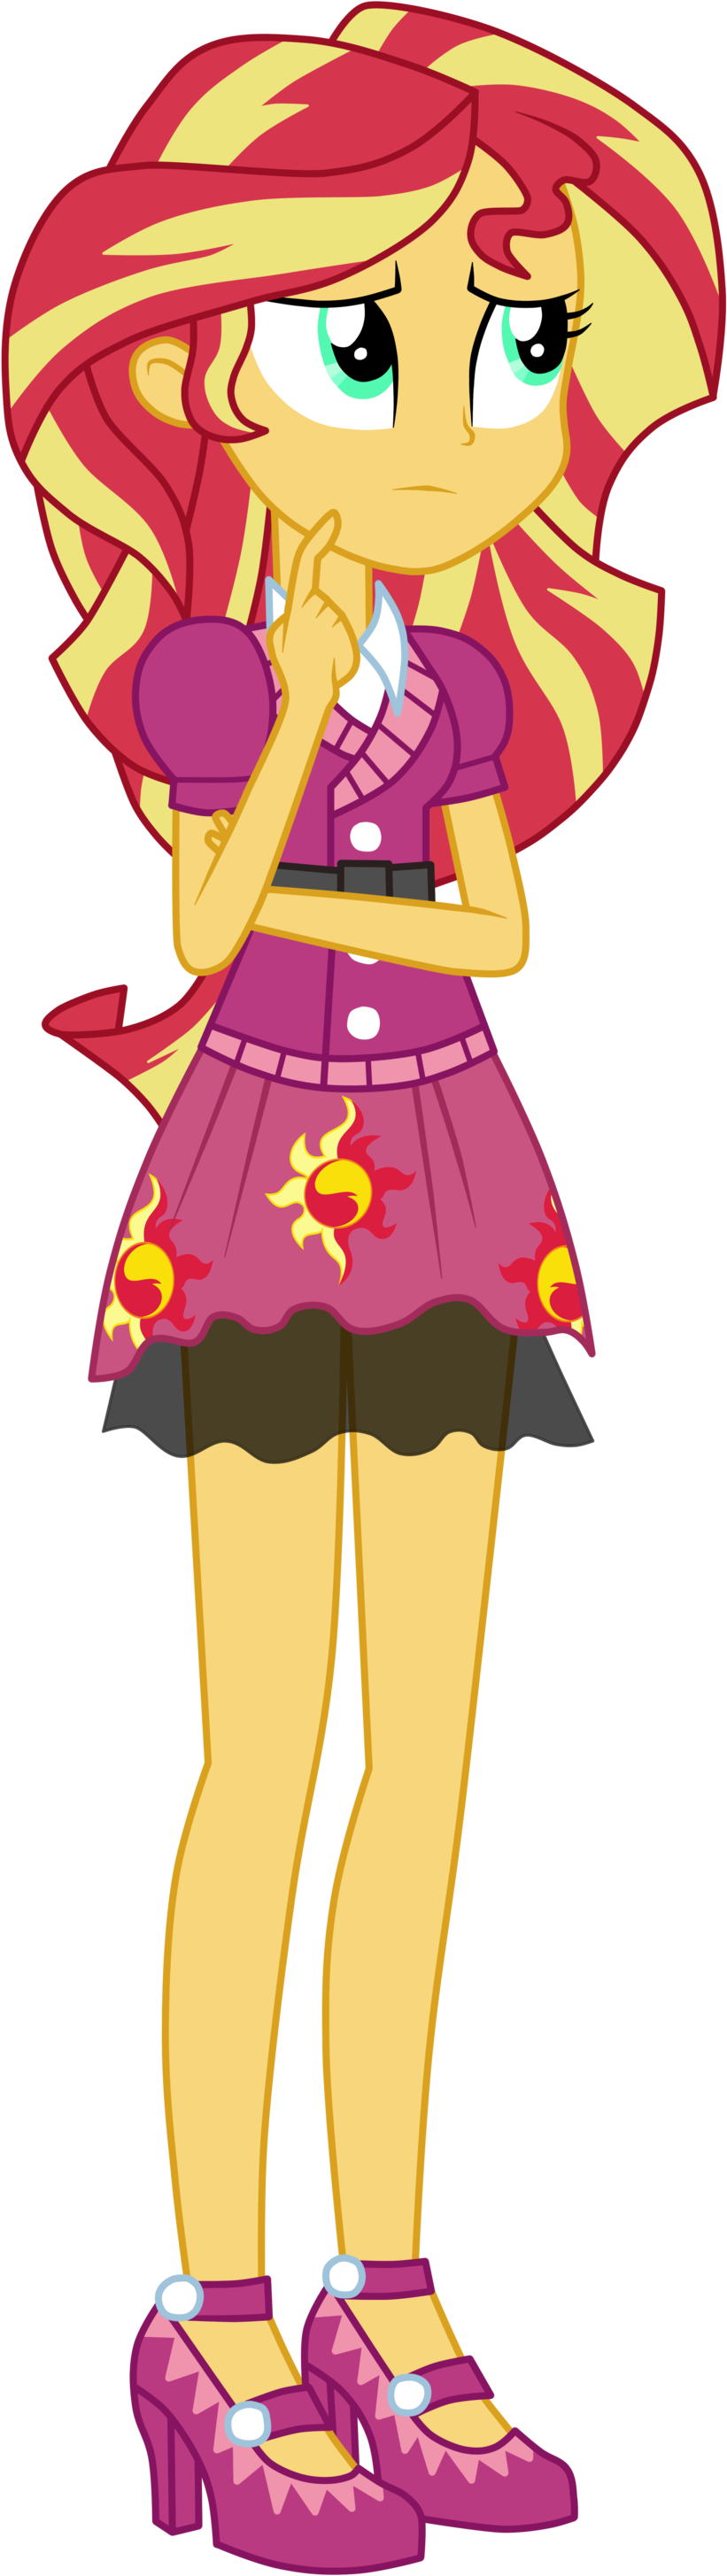 And, For The Semi Sandwich Pov Of Sunset's Mouth, You - Equestria Girls Friendship Games Sunset Shimmer (1024x3165)